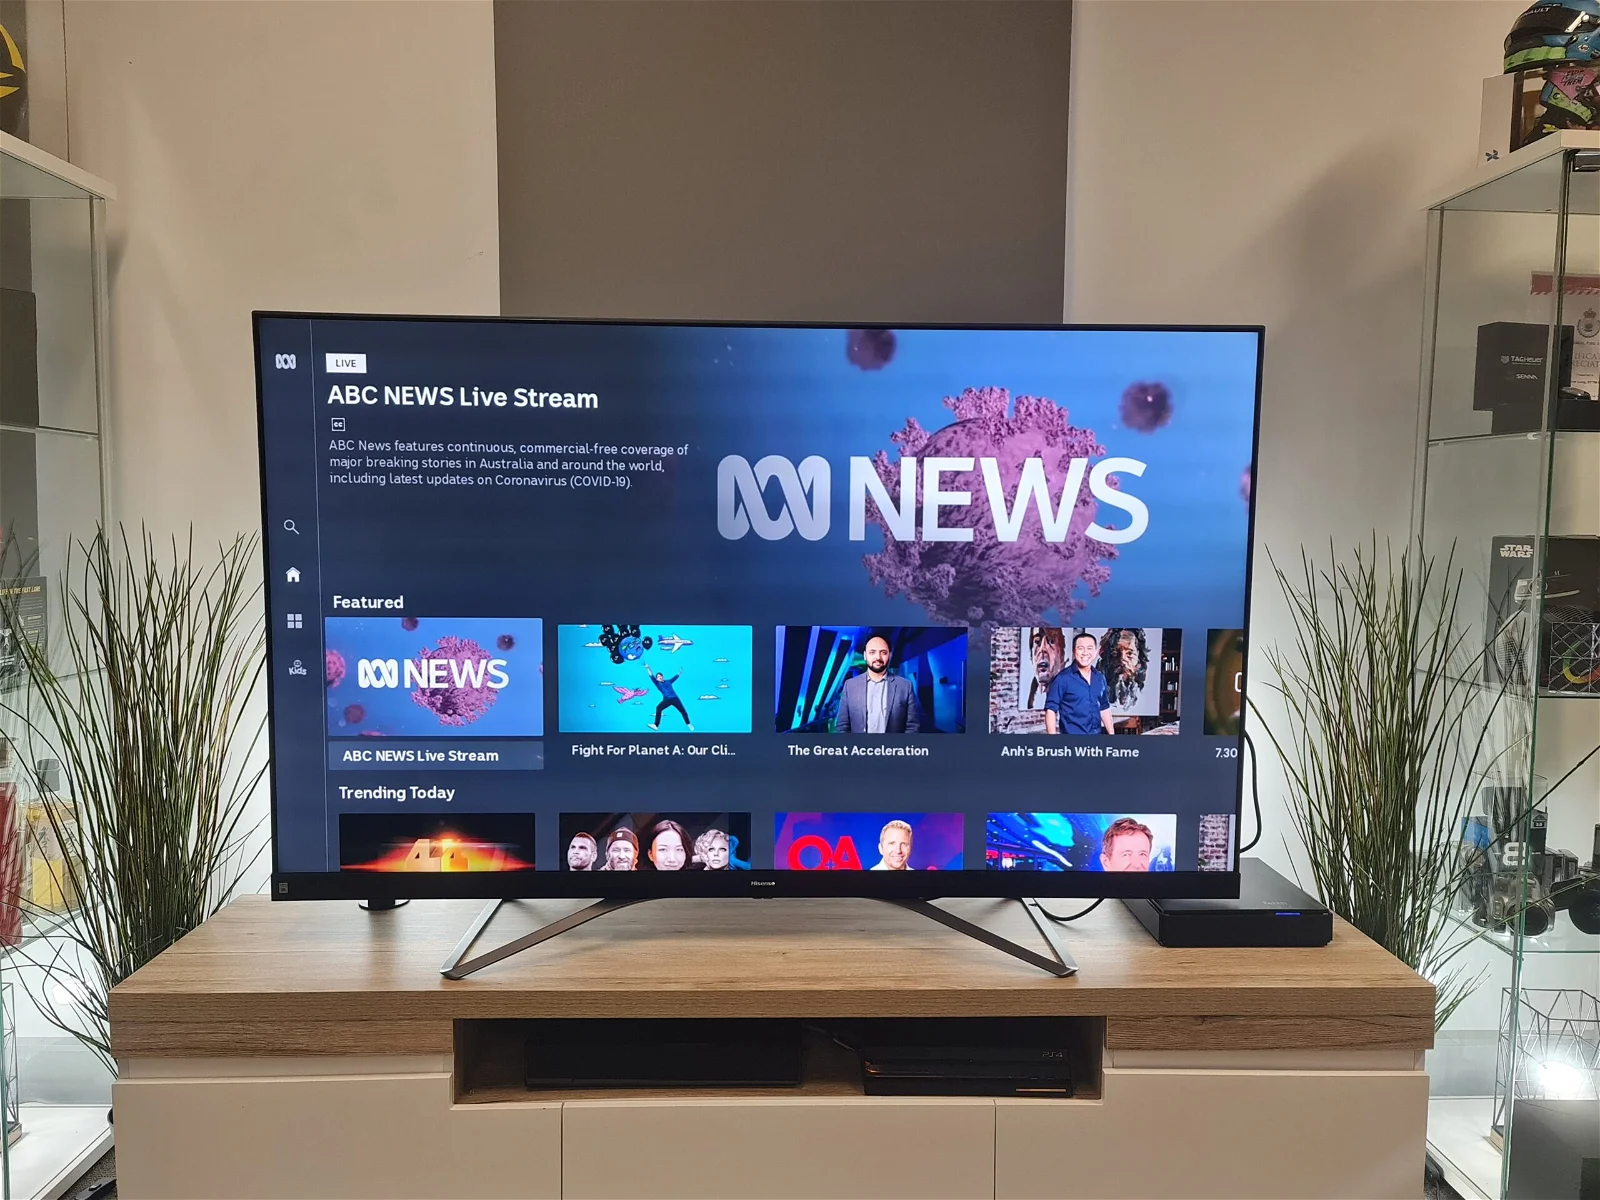 Got a new LG Smart TV? Here are the best apps you need to download